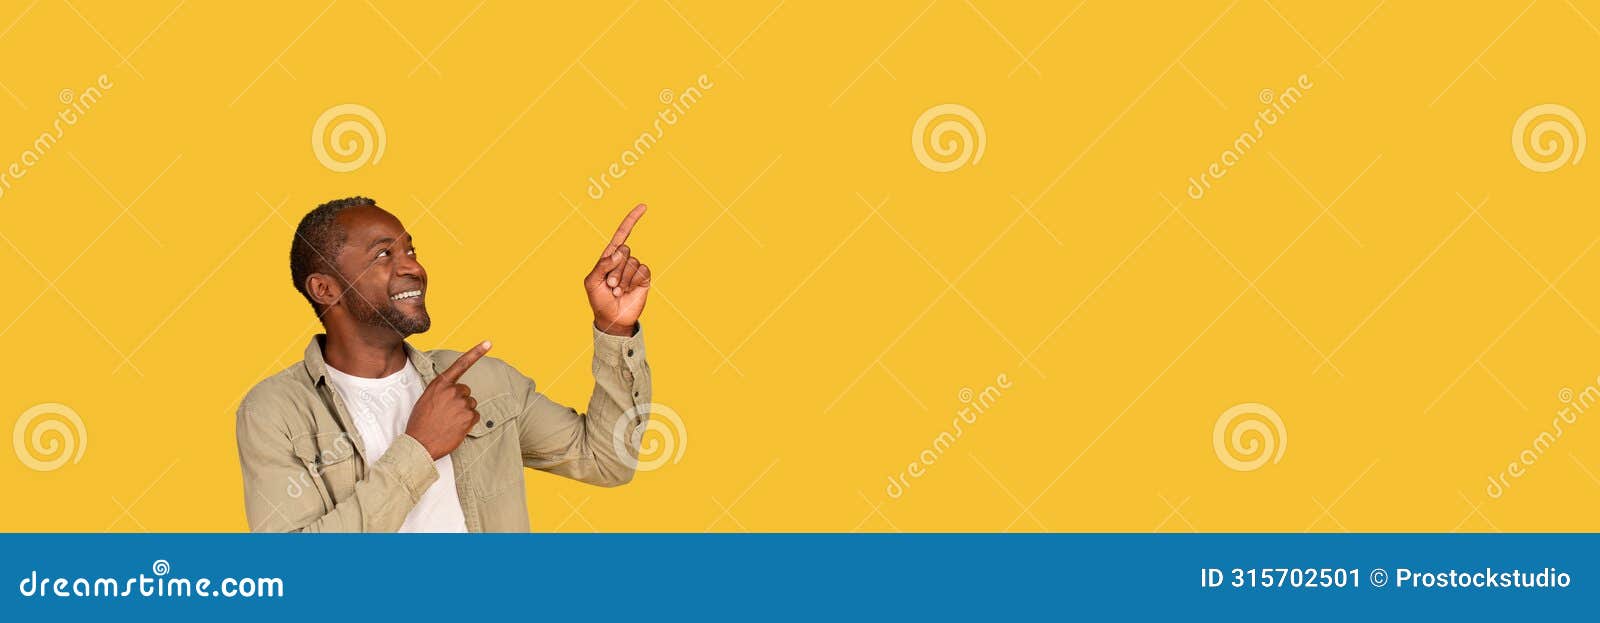 glad middle aged african american man pointing at empty space